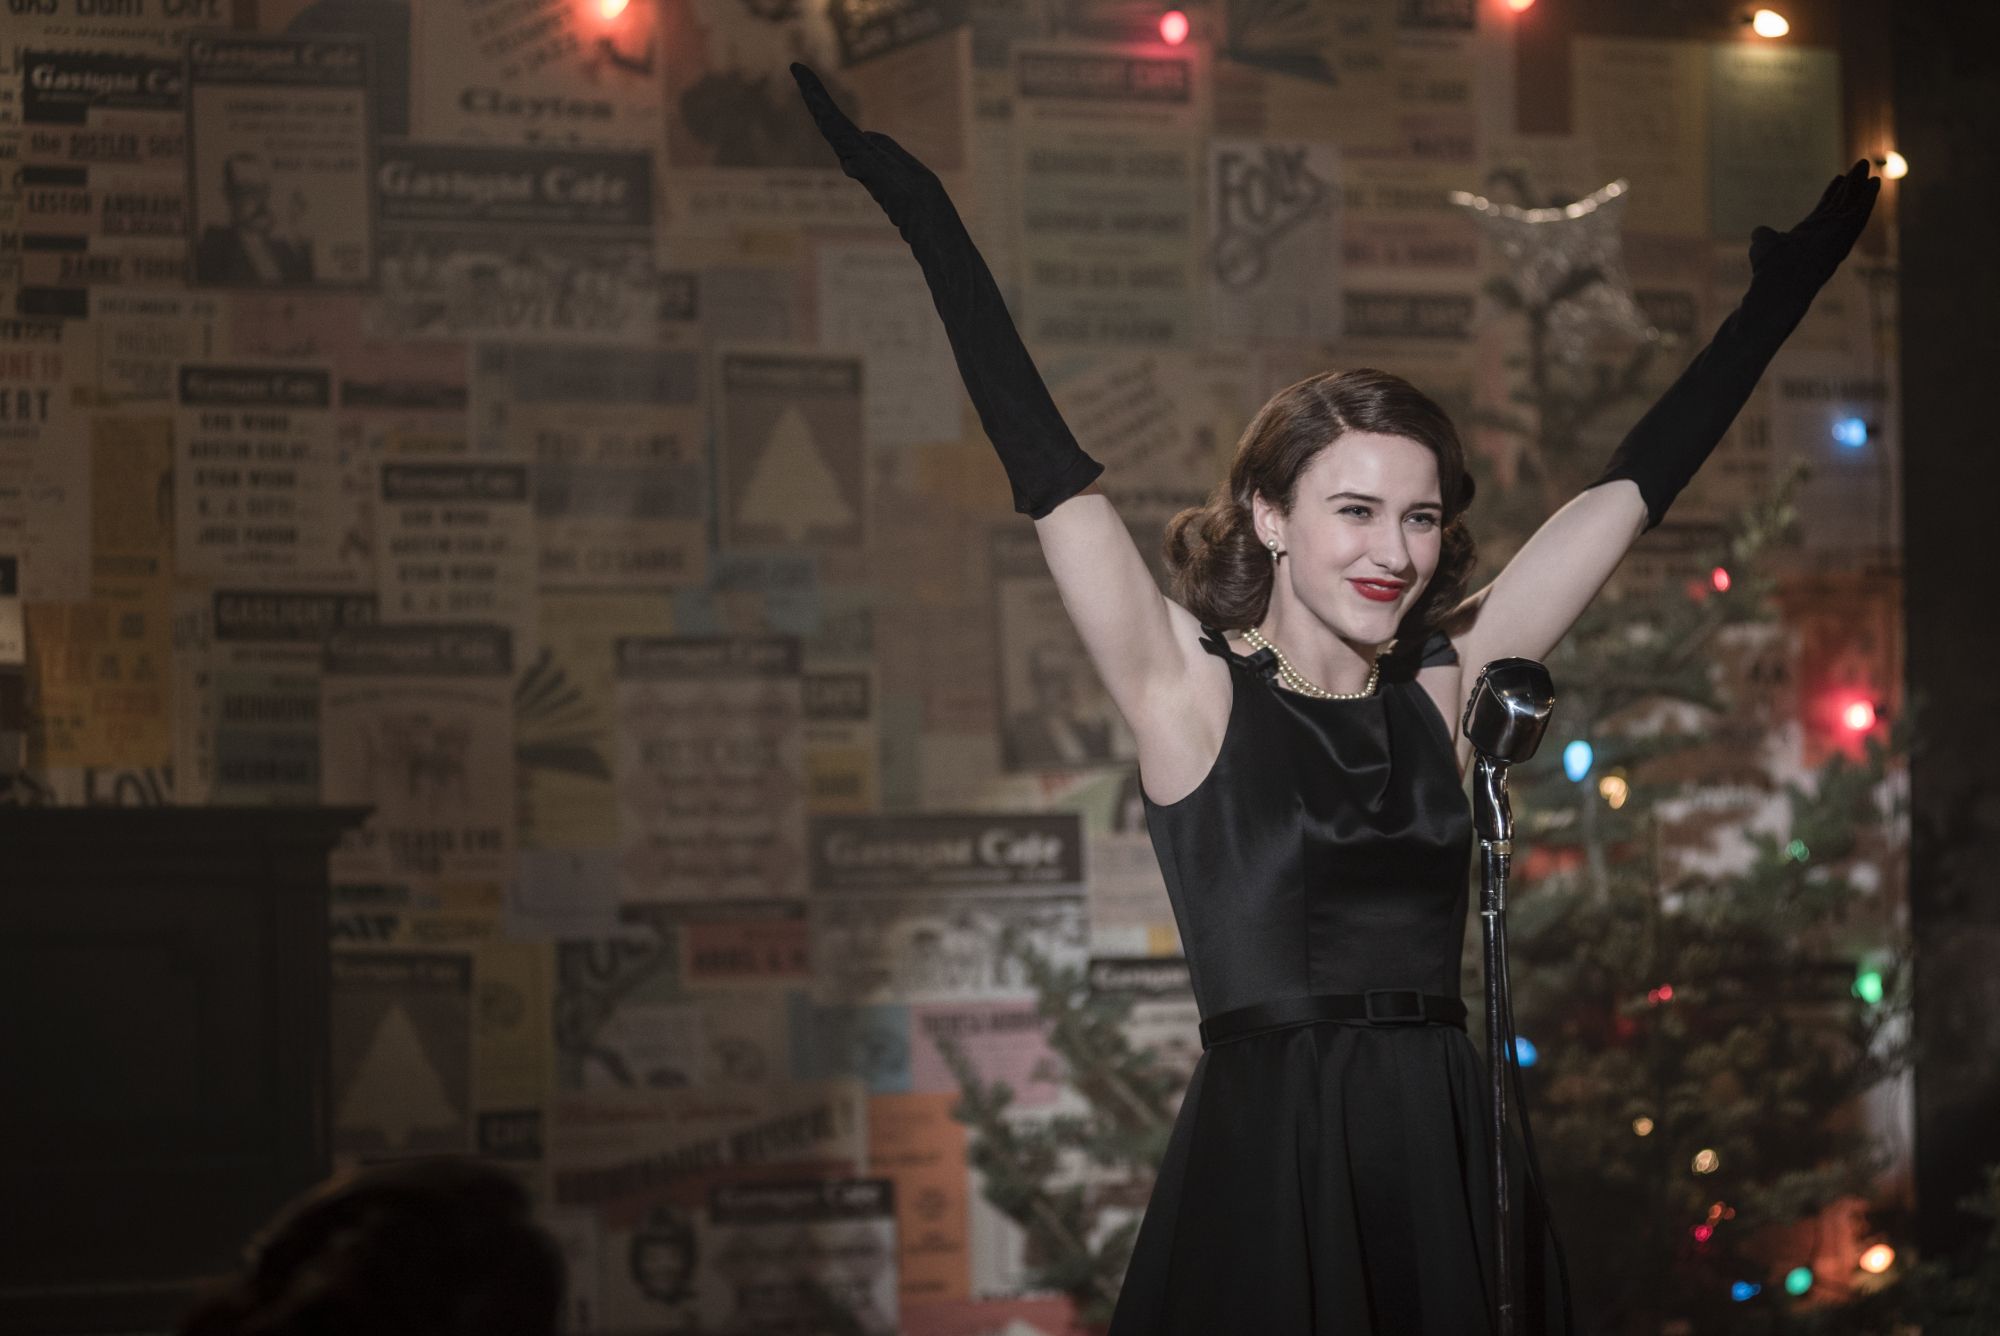 Film still: showing Mrs Maisel dressed up and embracing the success of her performance.